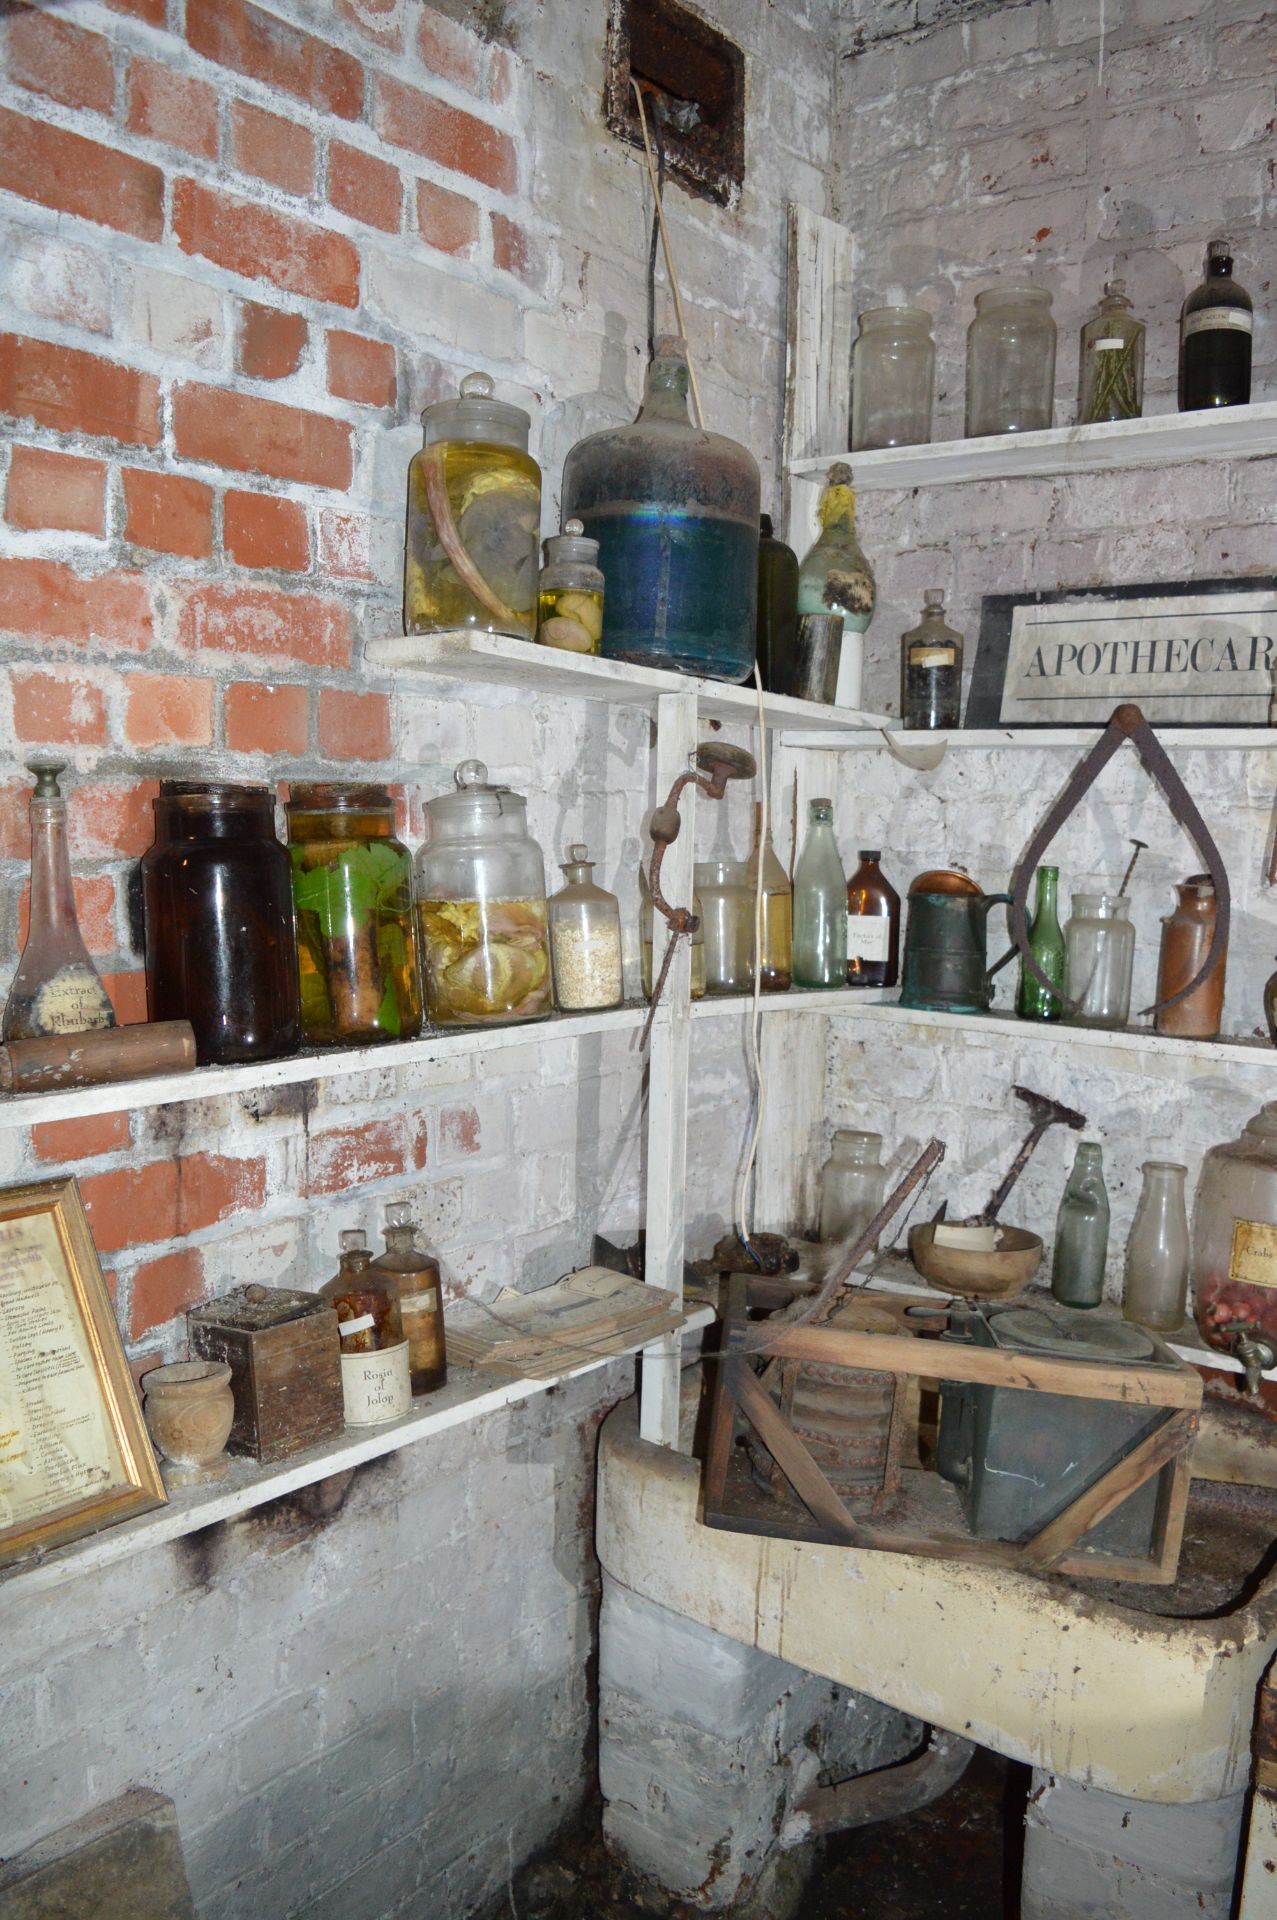 Apothecary Scene and Display Boards - Image 2 of 2